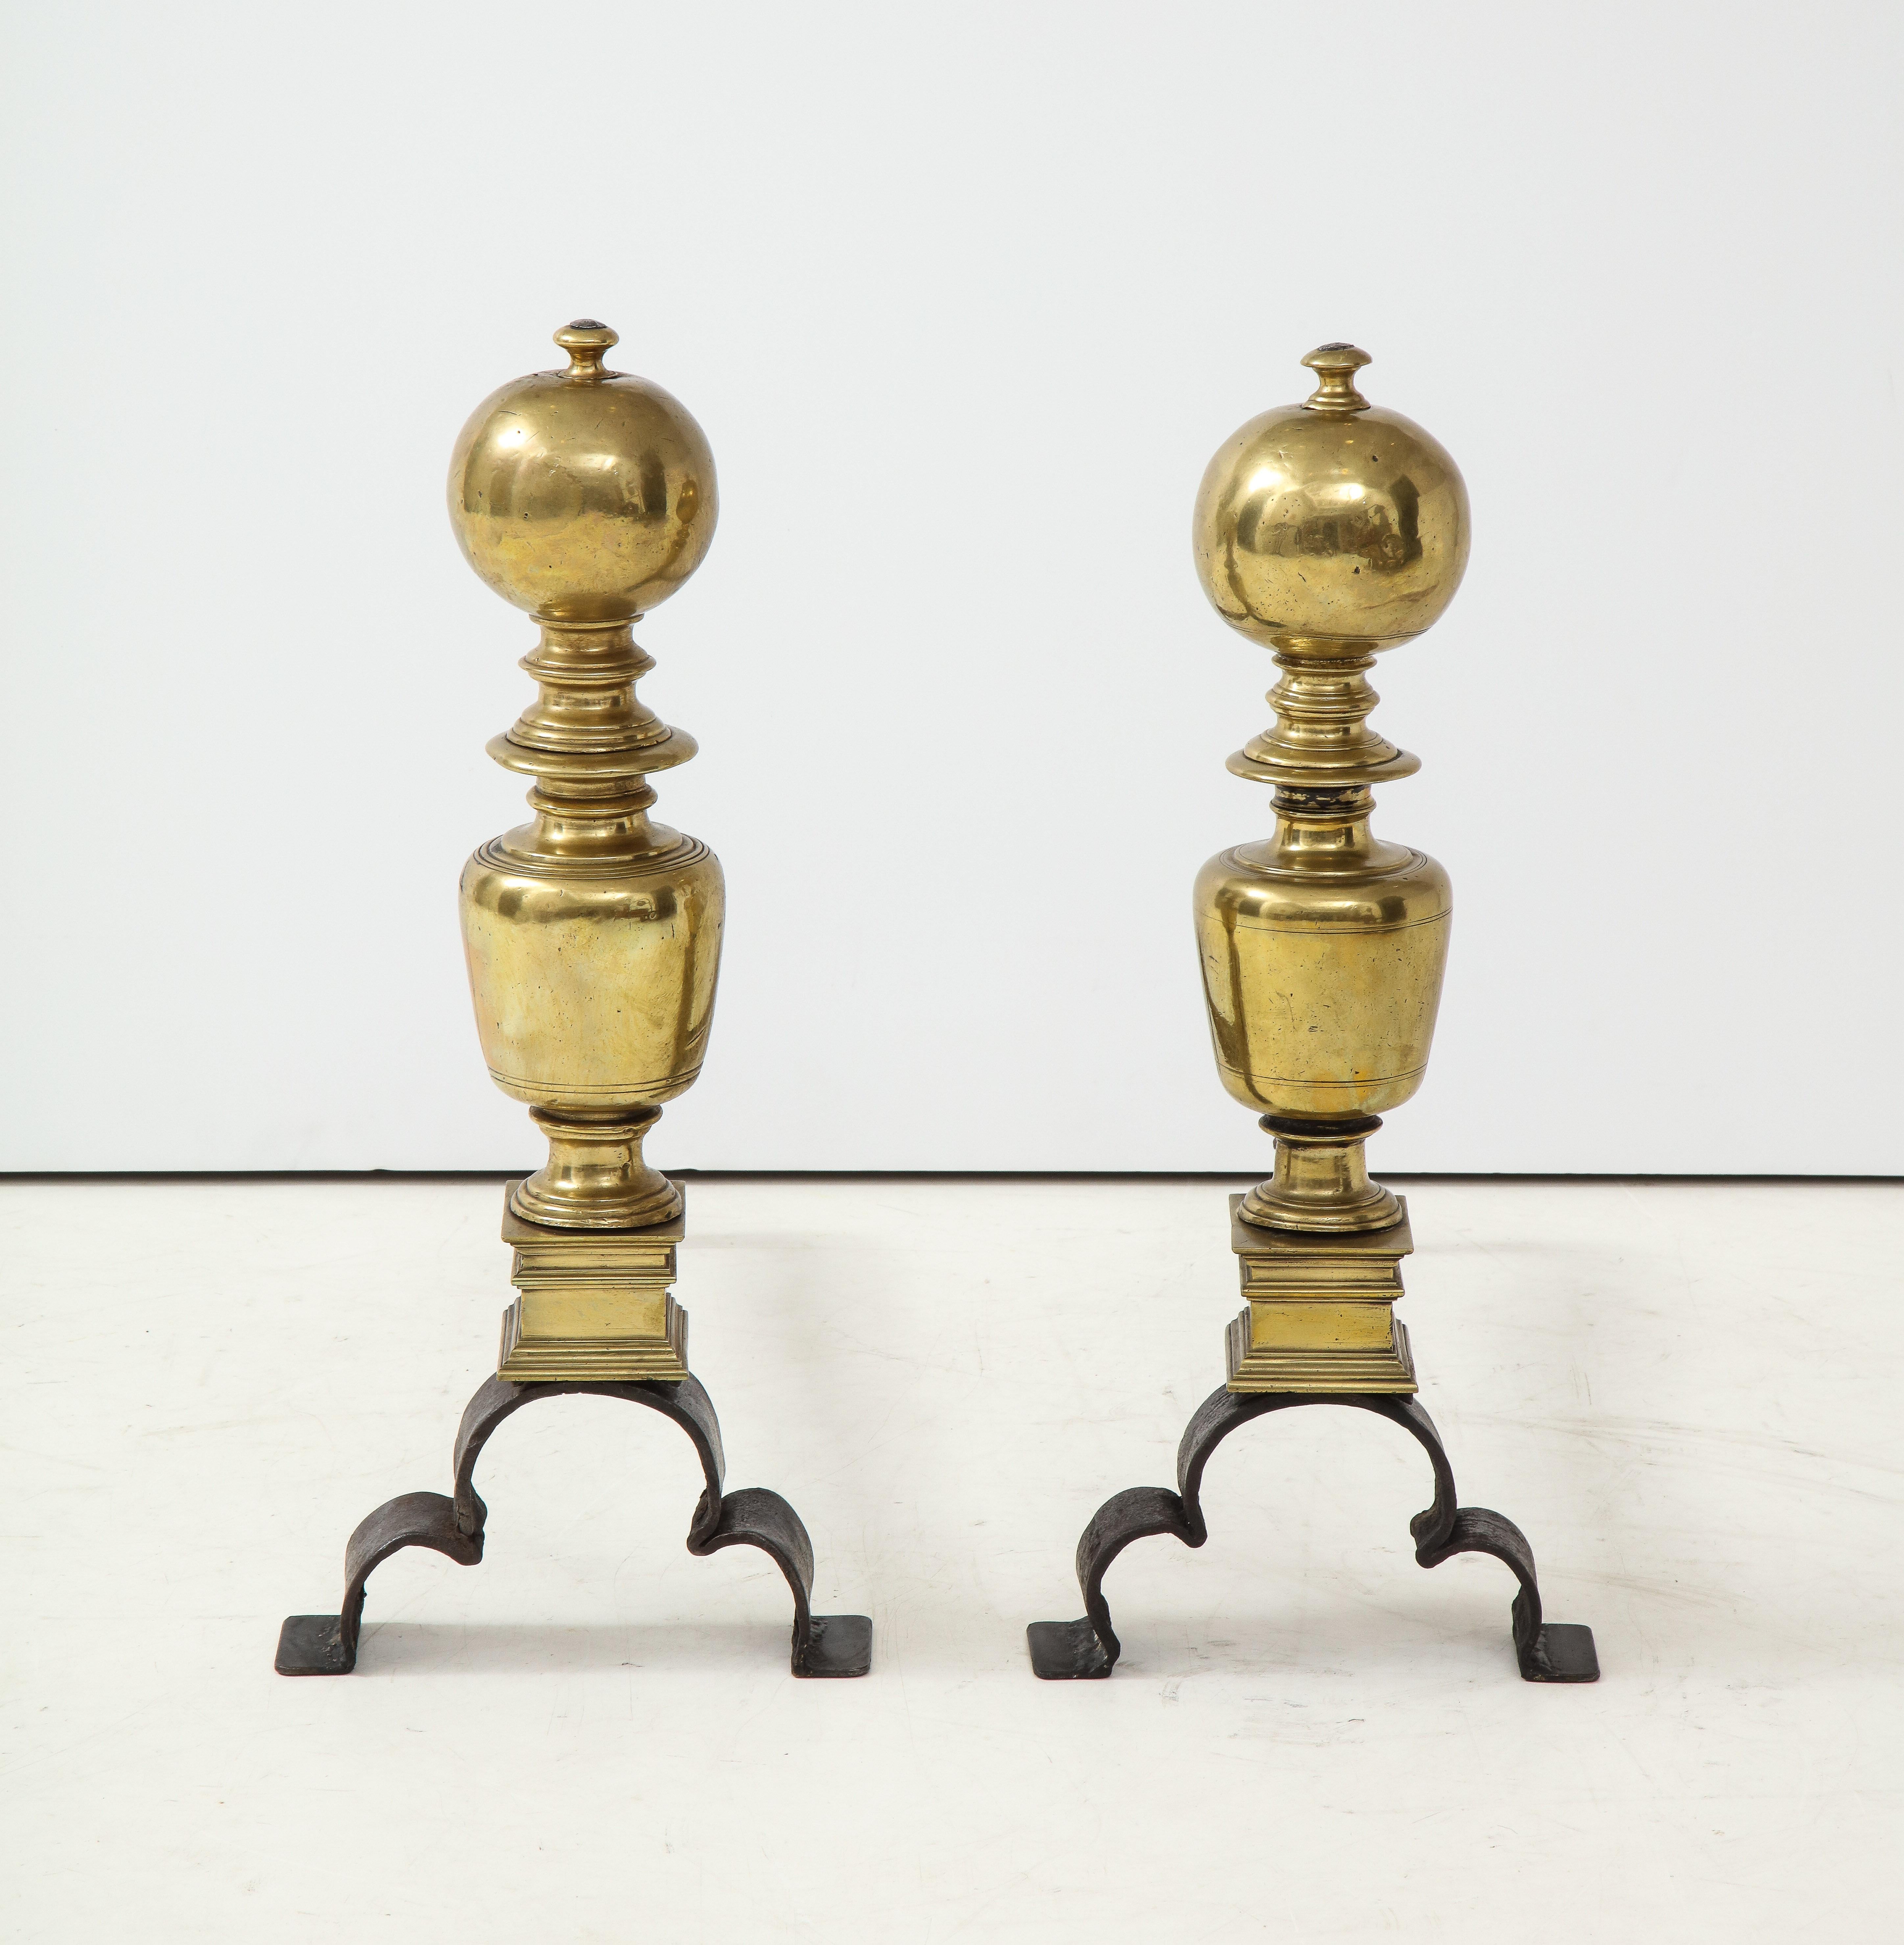 Good pair of bold brass and wrought iron andirons, the ball finials with nipple tops, over balustrade form bodies with squared bases, standing on quatrefoil arched wrought iron legs.





Measures: 21-1/2 x 9-1/2 x 25-1/4 in.